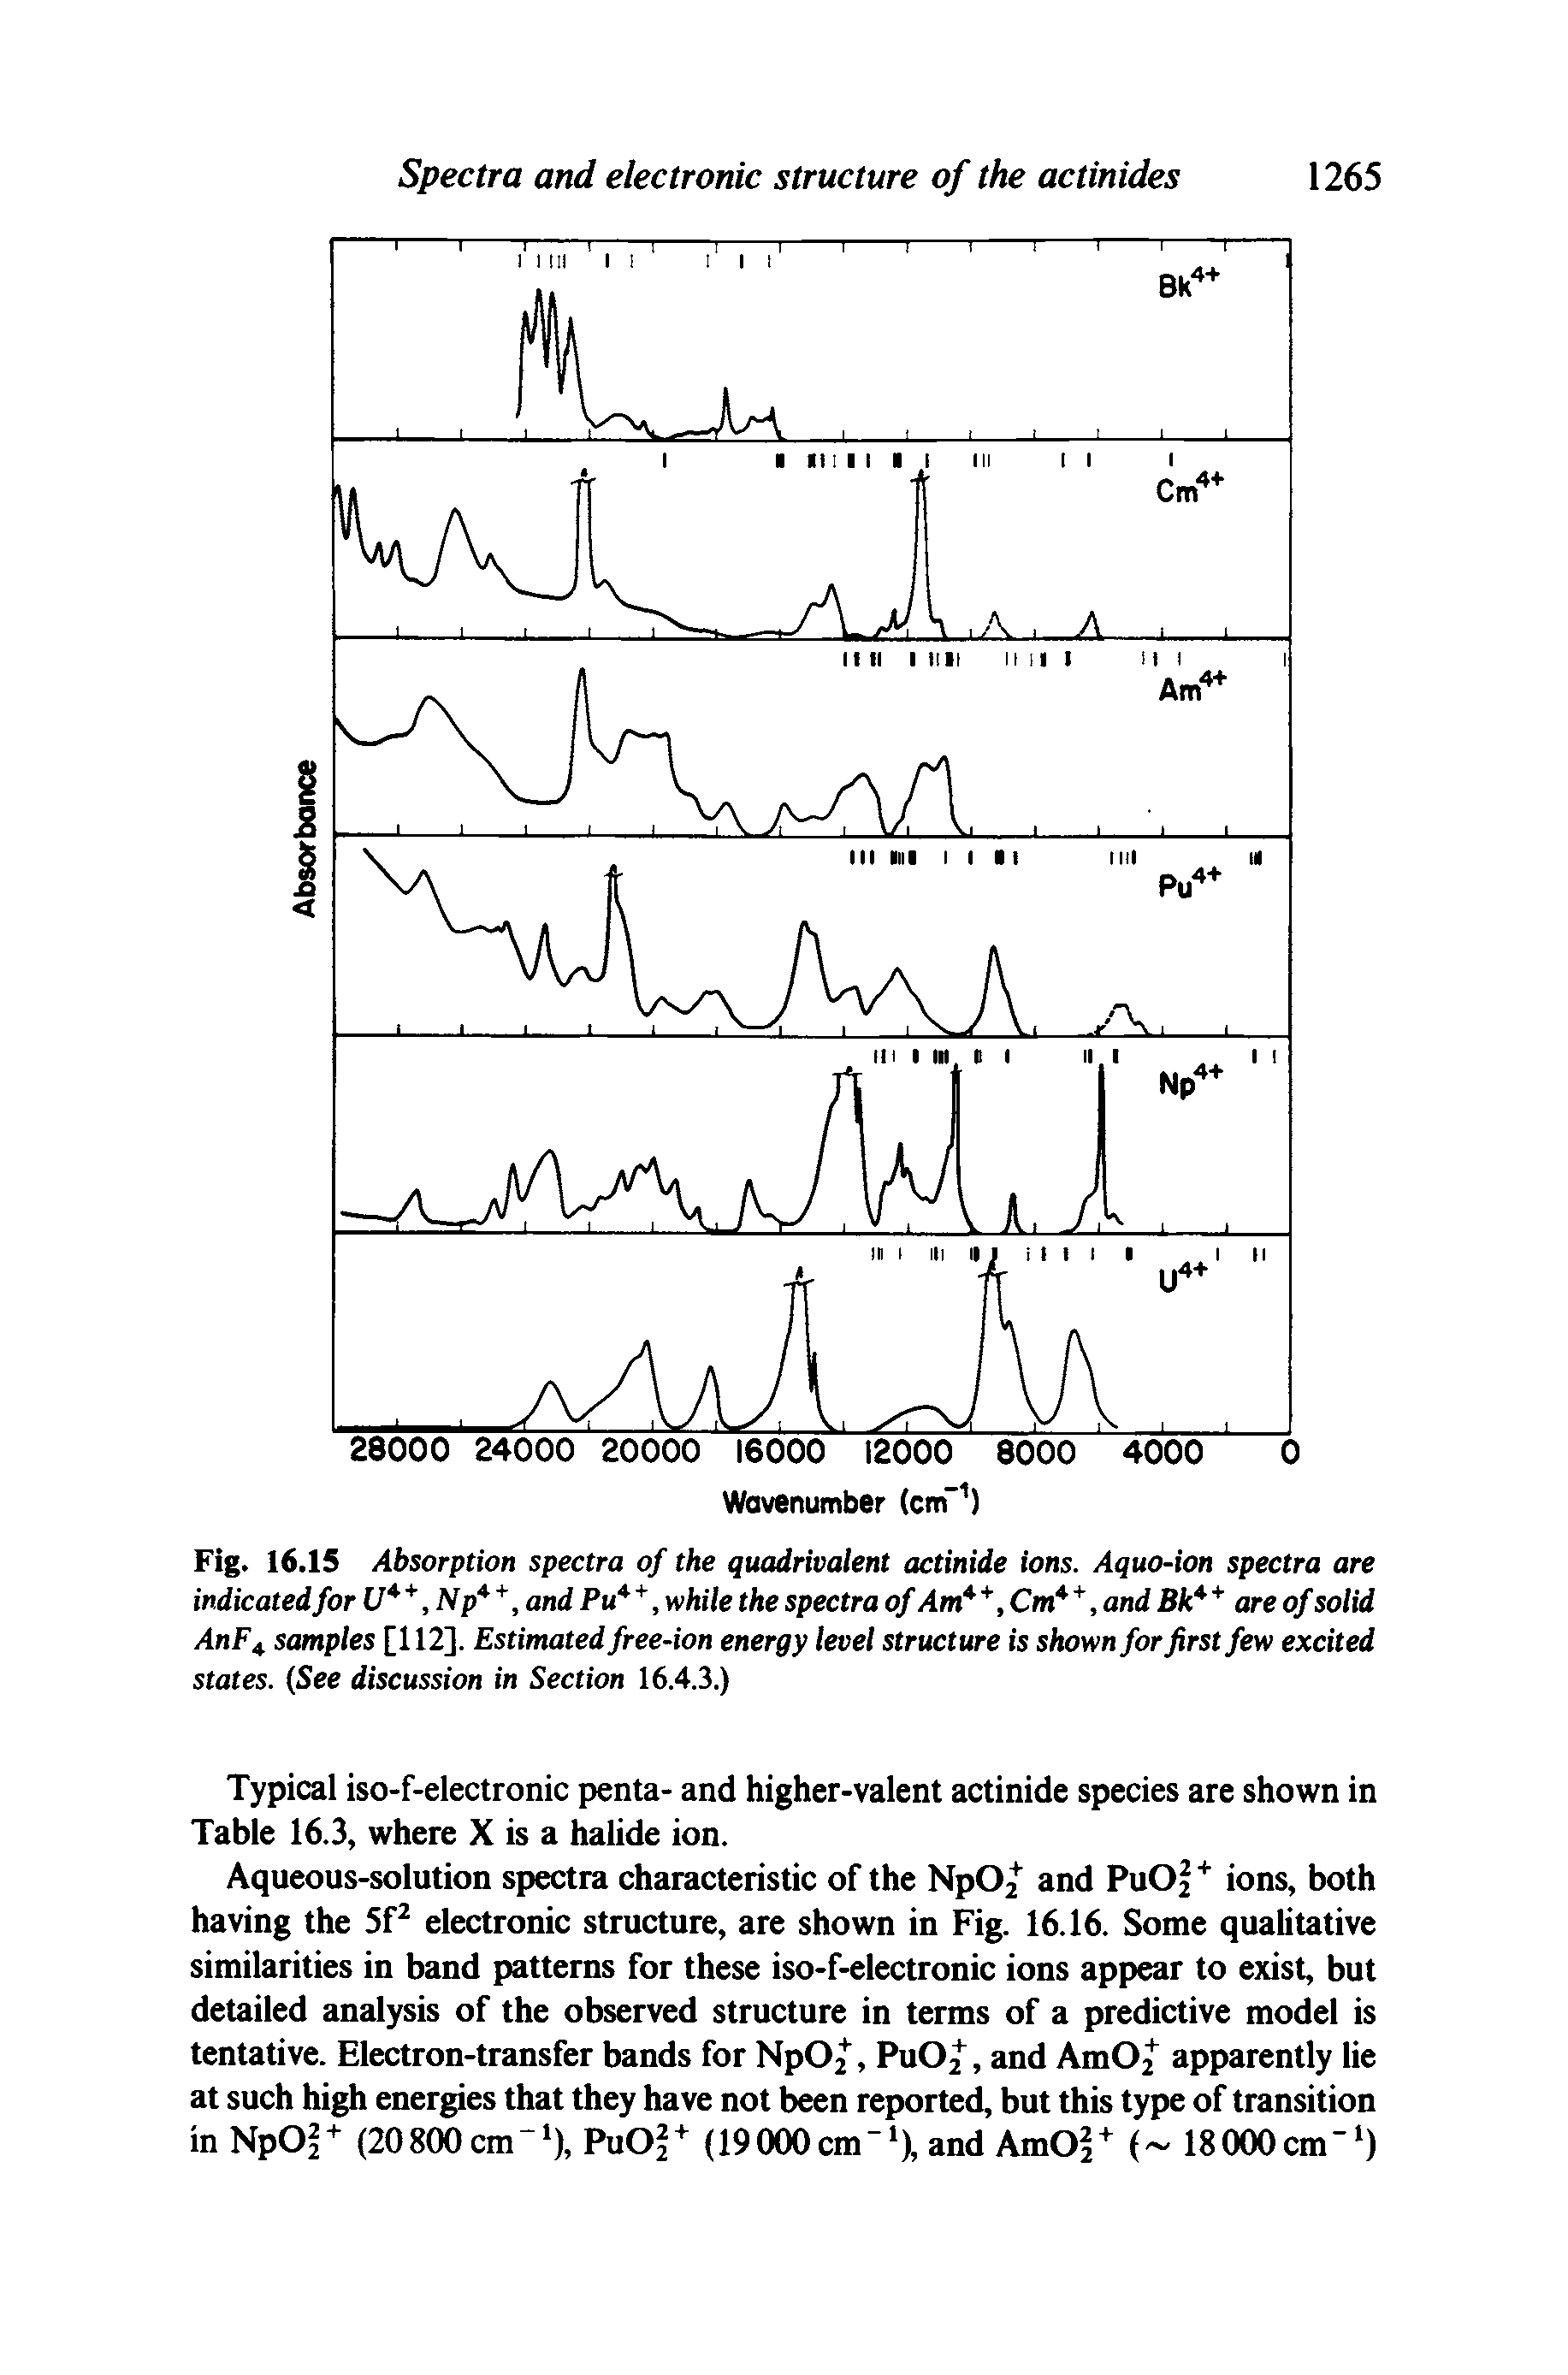 Fig. 16.15 Absorption spectra of the quadrivalent actinide ions. Aquo-ion spectra are indicated for U, Np, and Pu, while the spectra of Am, Cm, and Bk are of solid AnF samples [112]. Estimated free-ion energy level structure is shown for first few excited states. See discussion in Section 16.4.3.)...